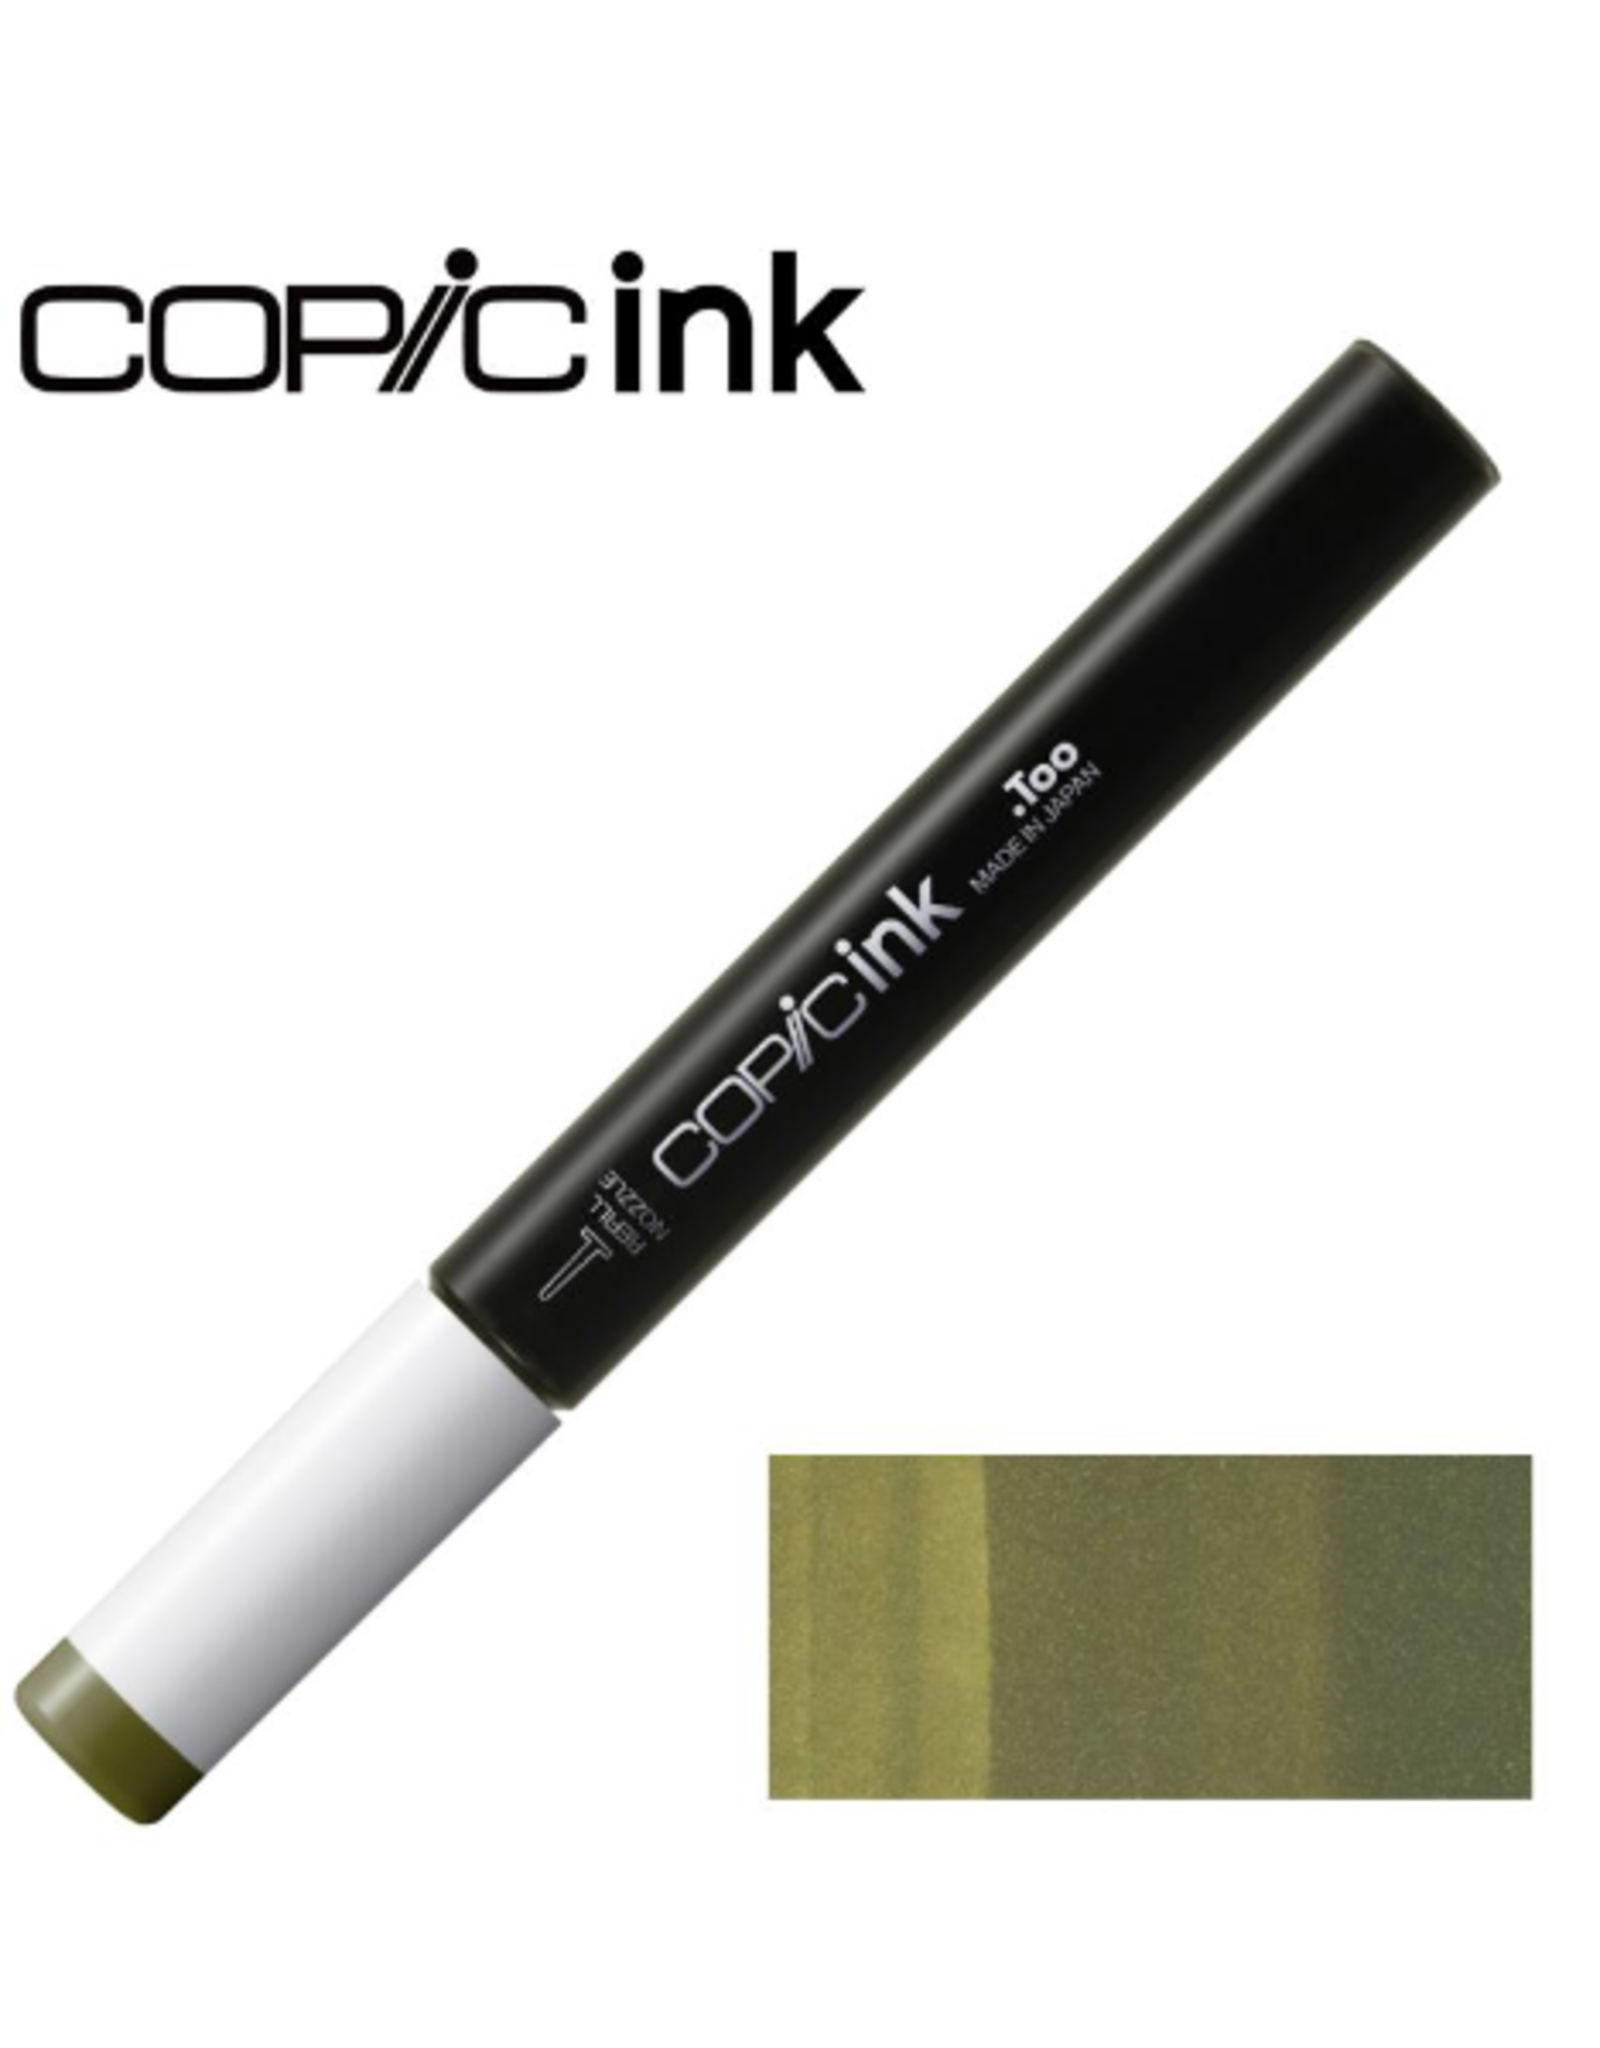 COPIC COPIC YG97 SPANISH OLIVE REFILL